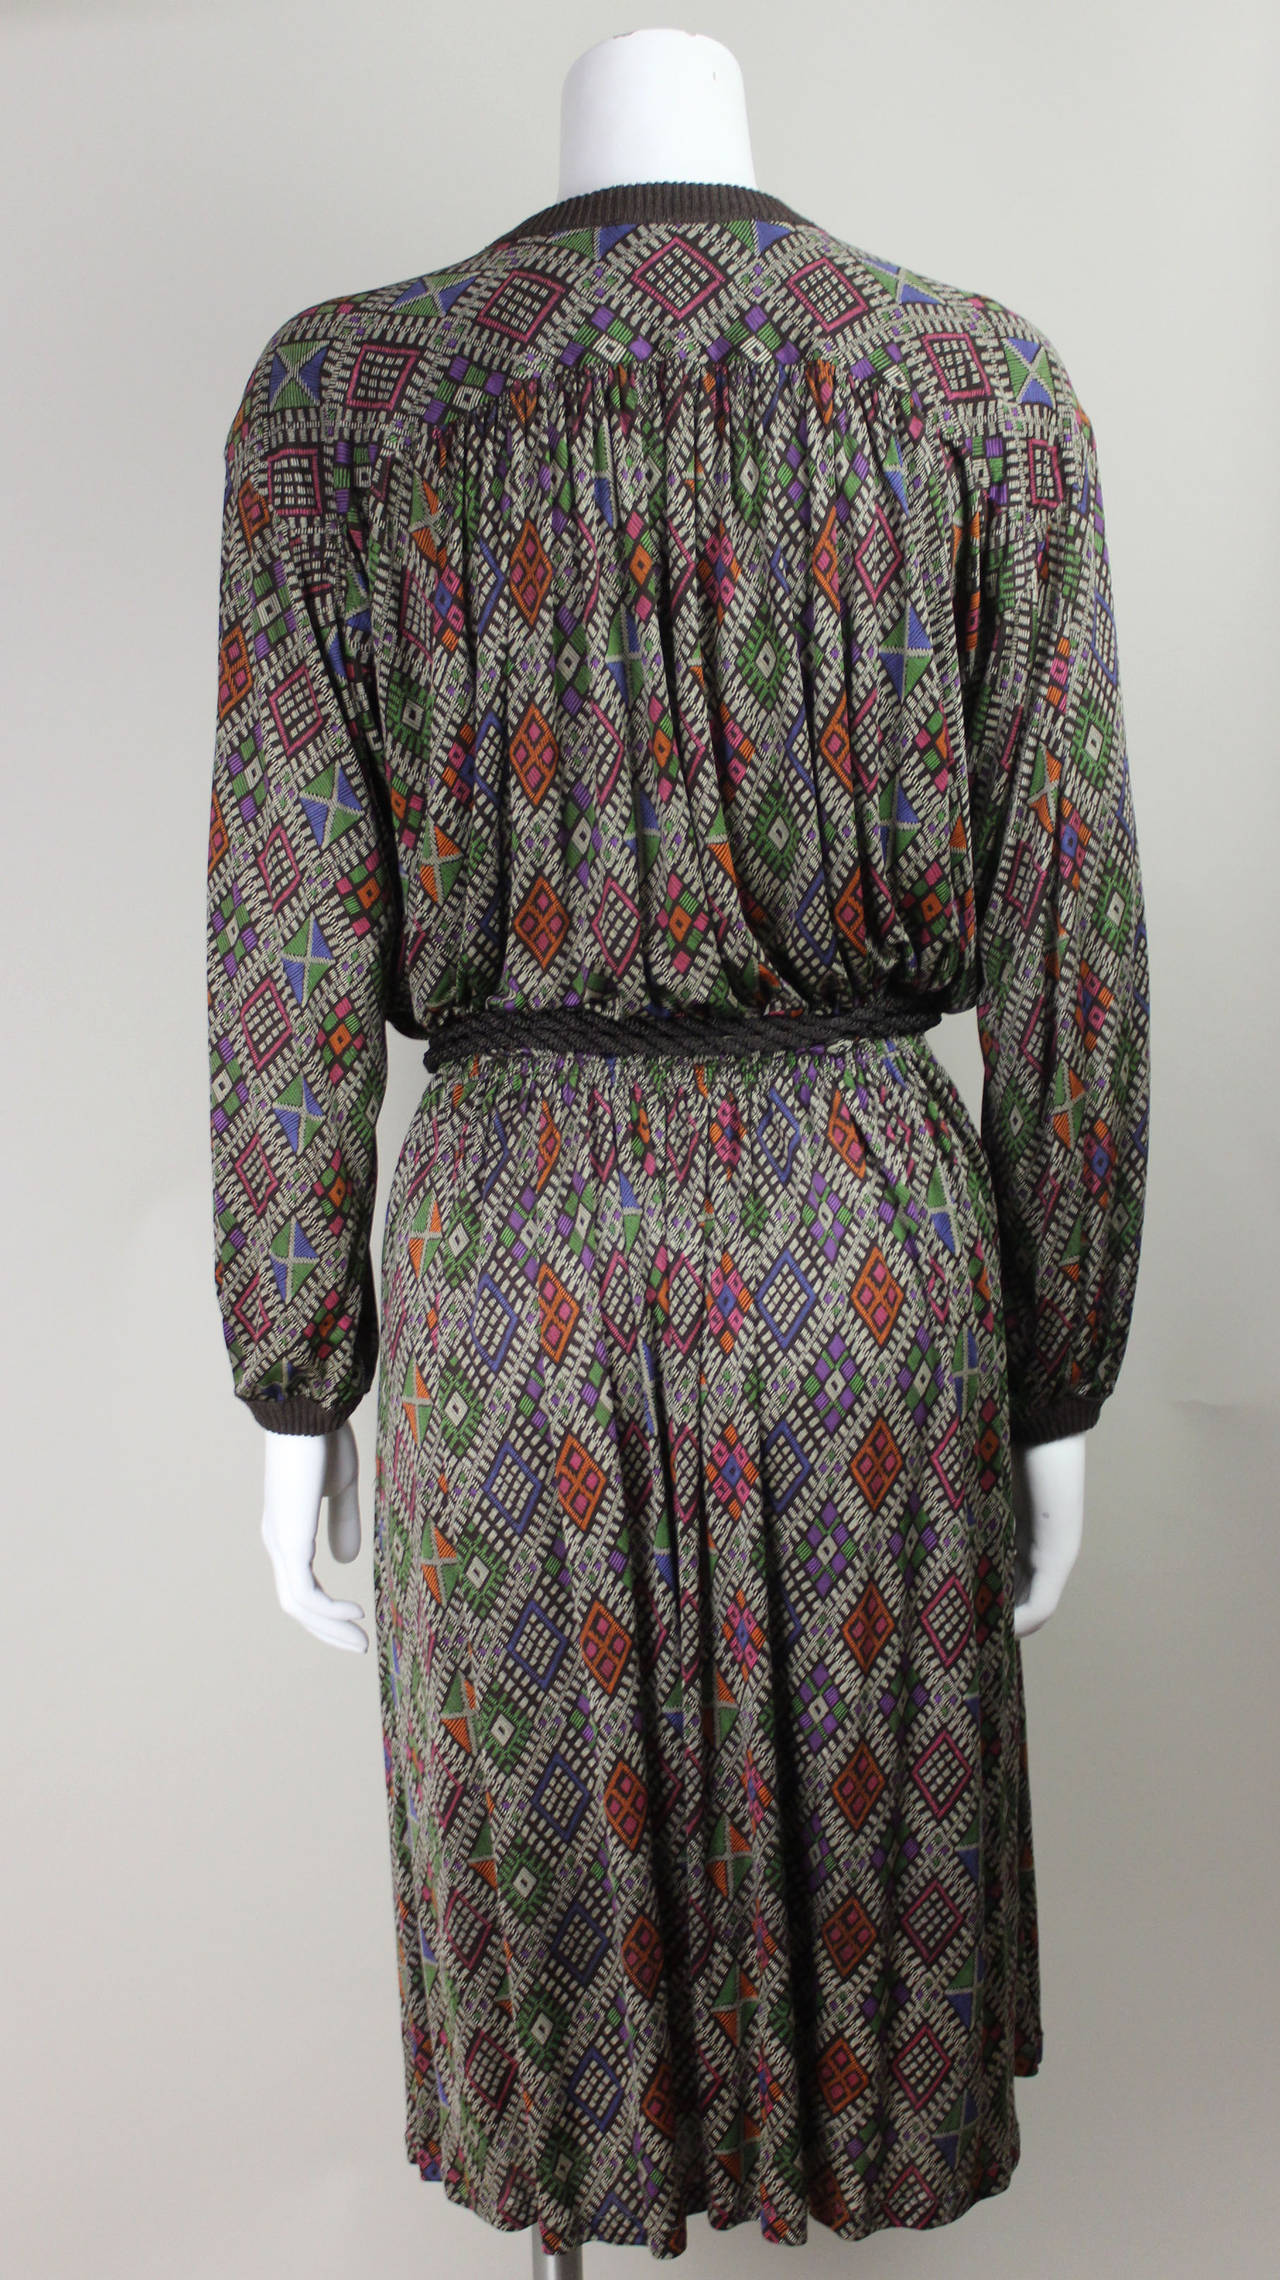 Missoni 1970s Slinky Silk Dress In Excellent Condition For Sale In New York, NY